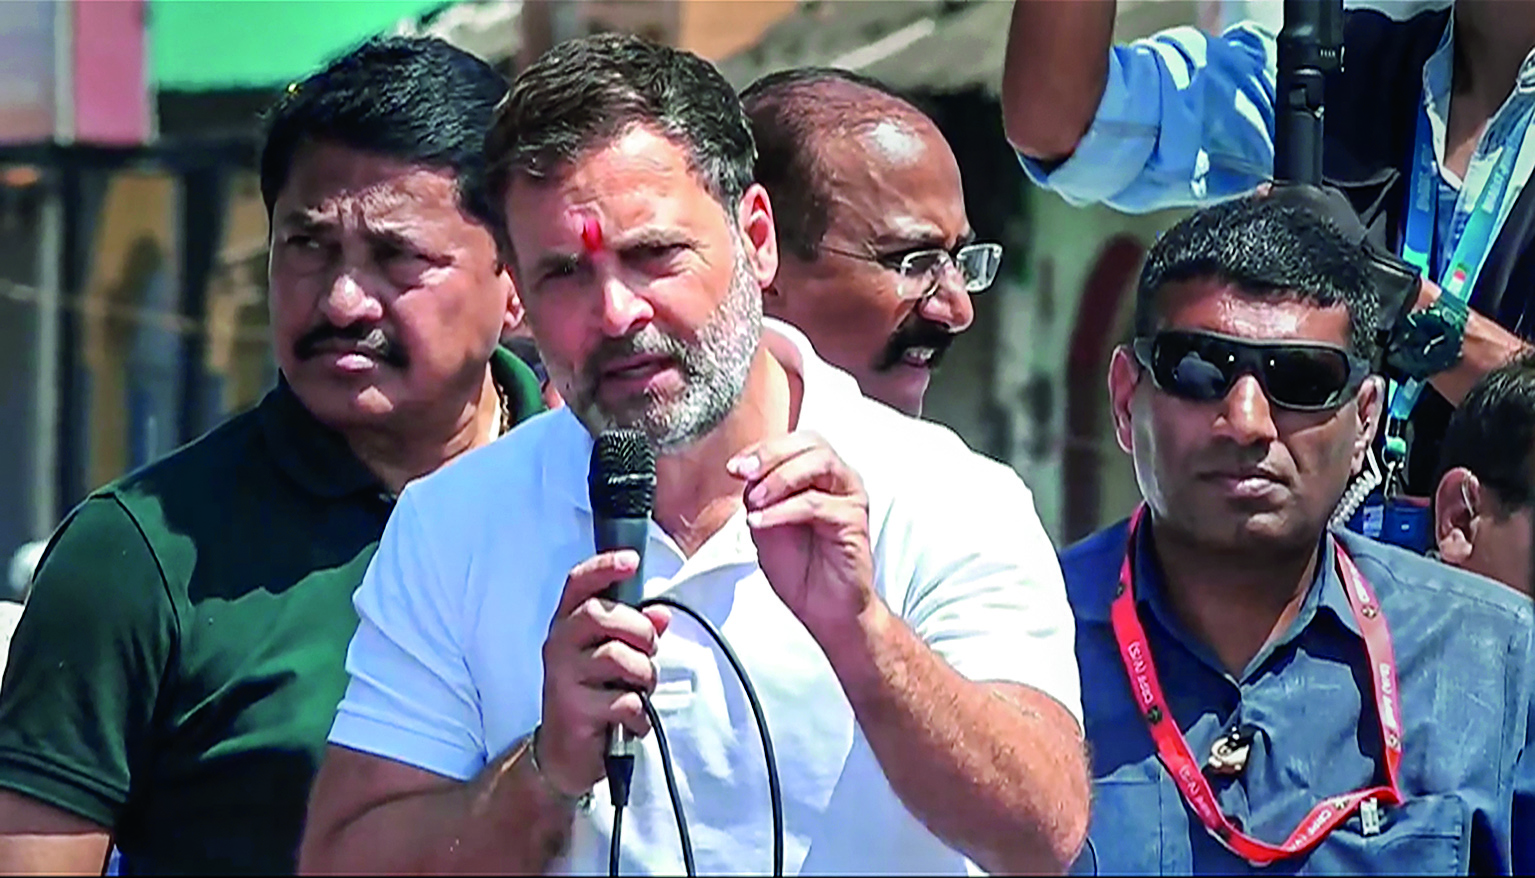 Unemployment, inflation and ‘bhagidari’ are crucial issues country is facing: Rahul